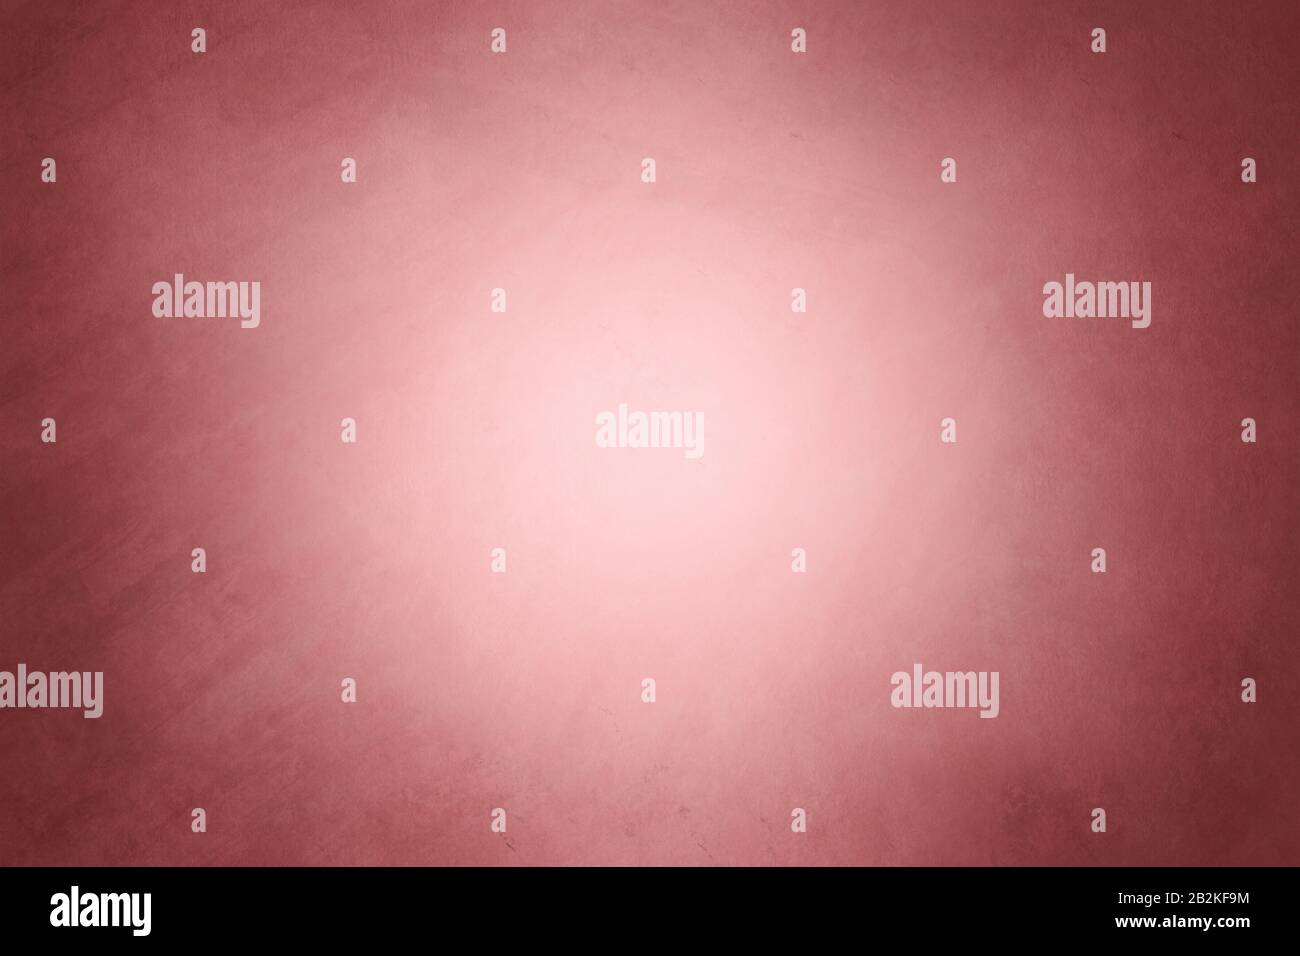 Vintage pink grungy texture background for your text or prints Stock Photo